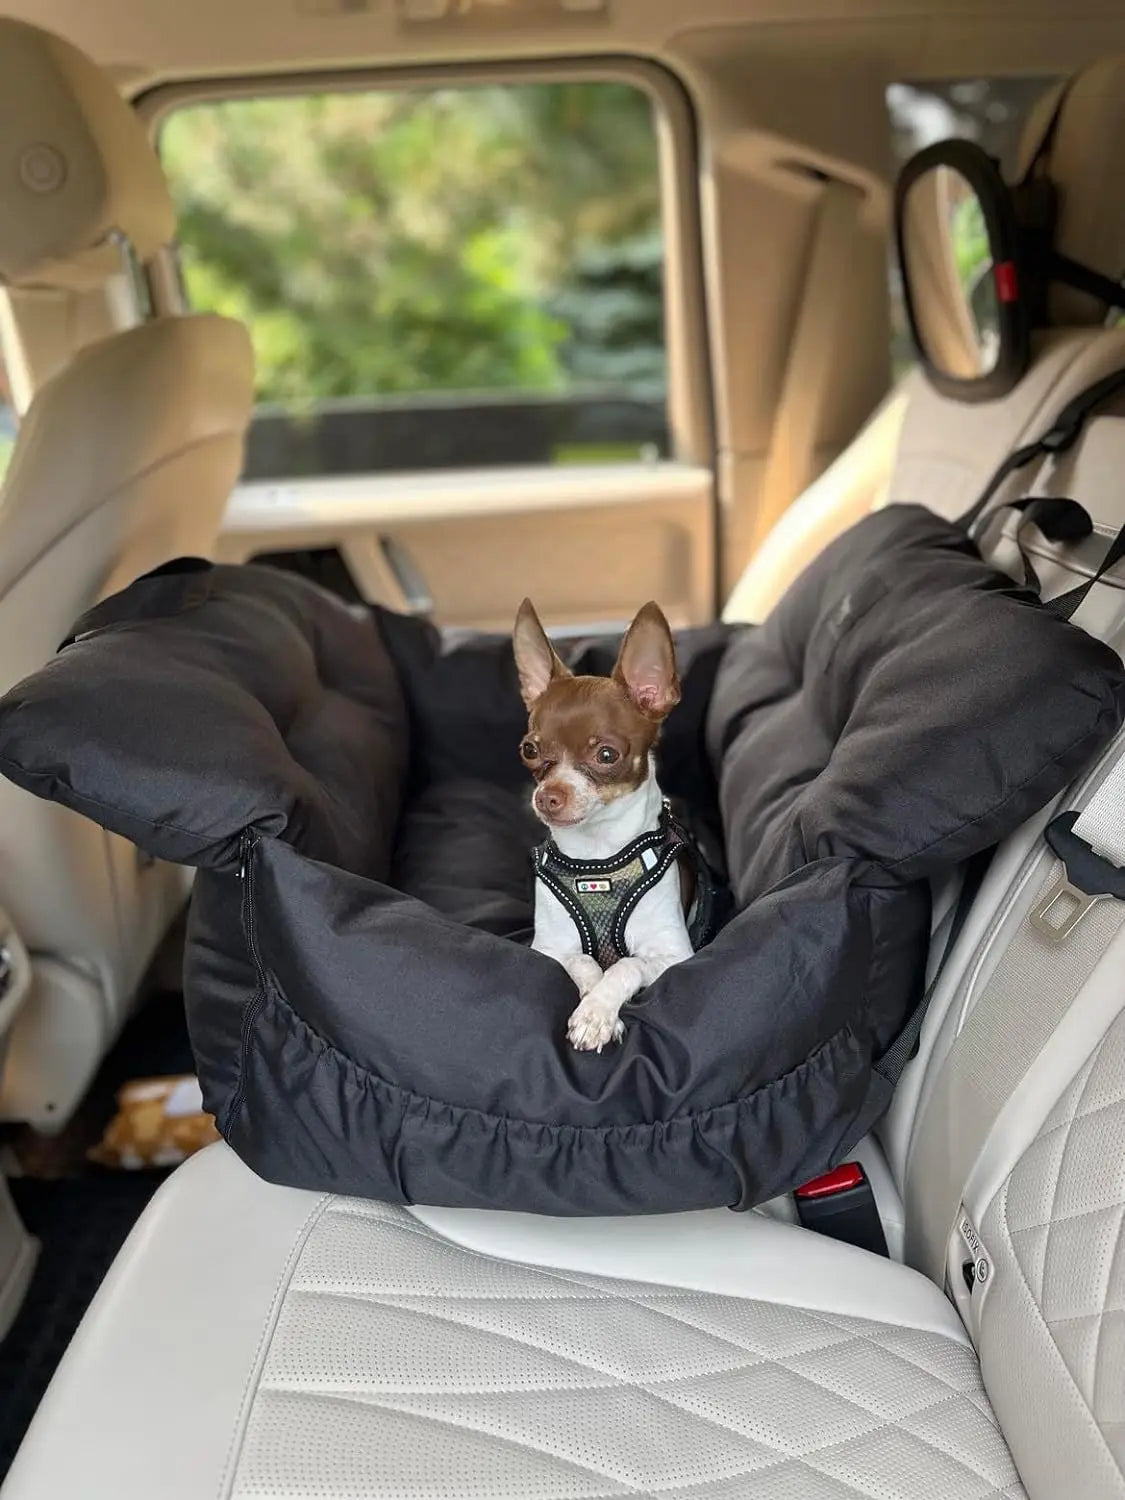 Premium Dog Car Seat & Booster Seat for Small & Medium Pets Under 30lbs